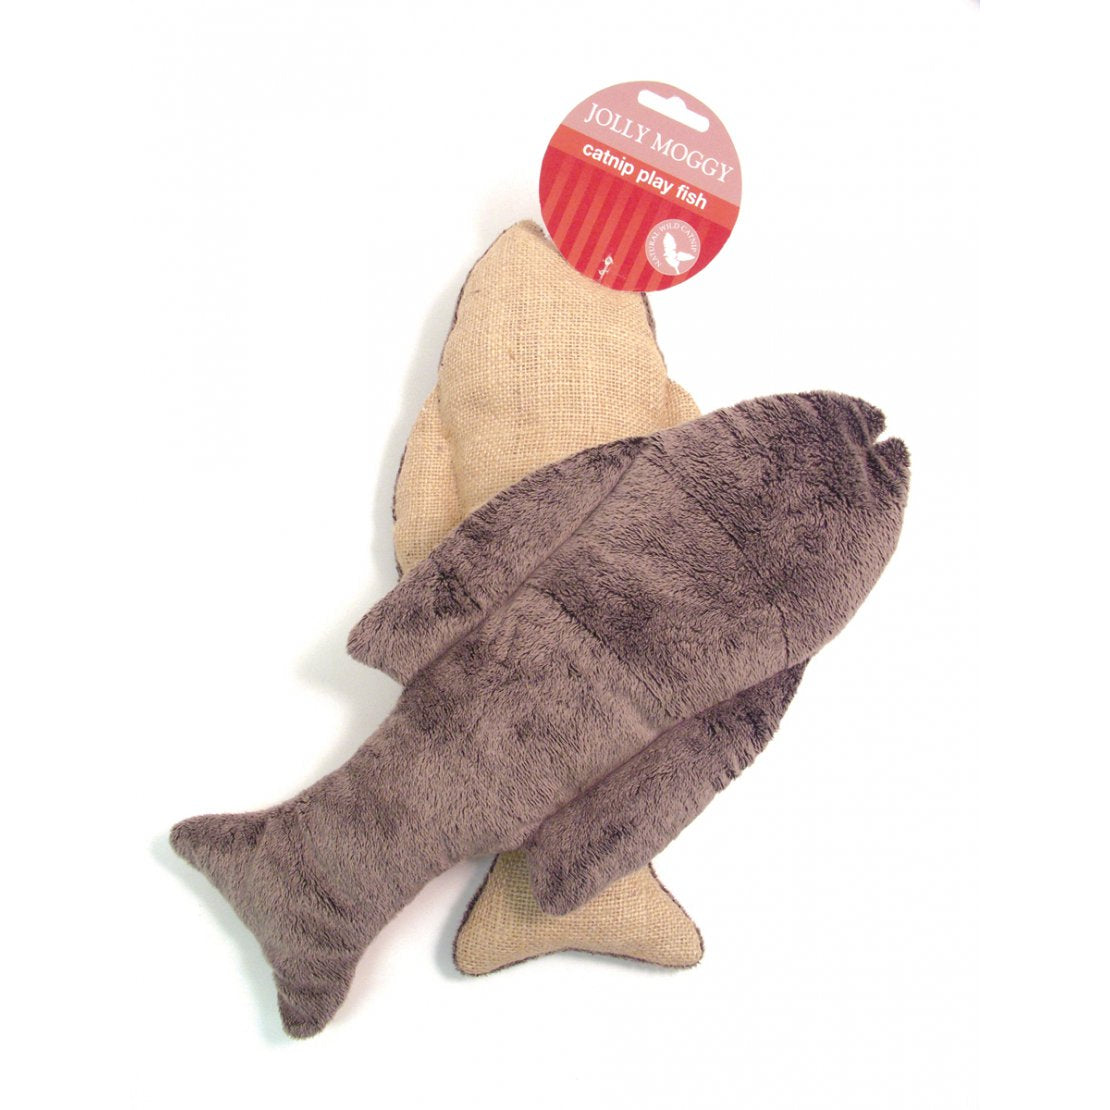 Jolly Moggy Catnip Play Fish Cat Toy - Pica's Pets